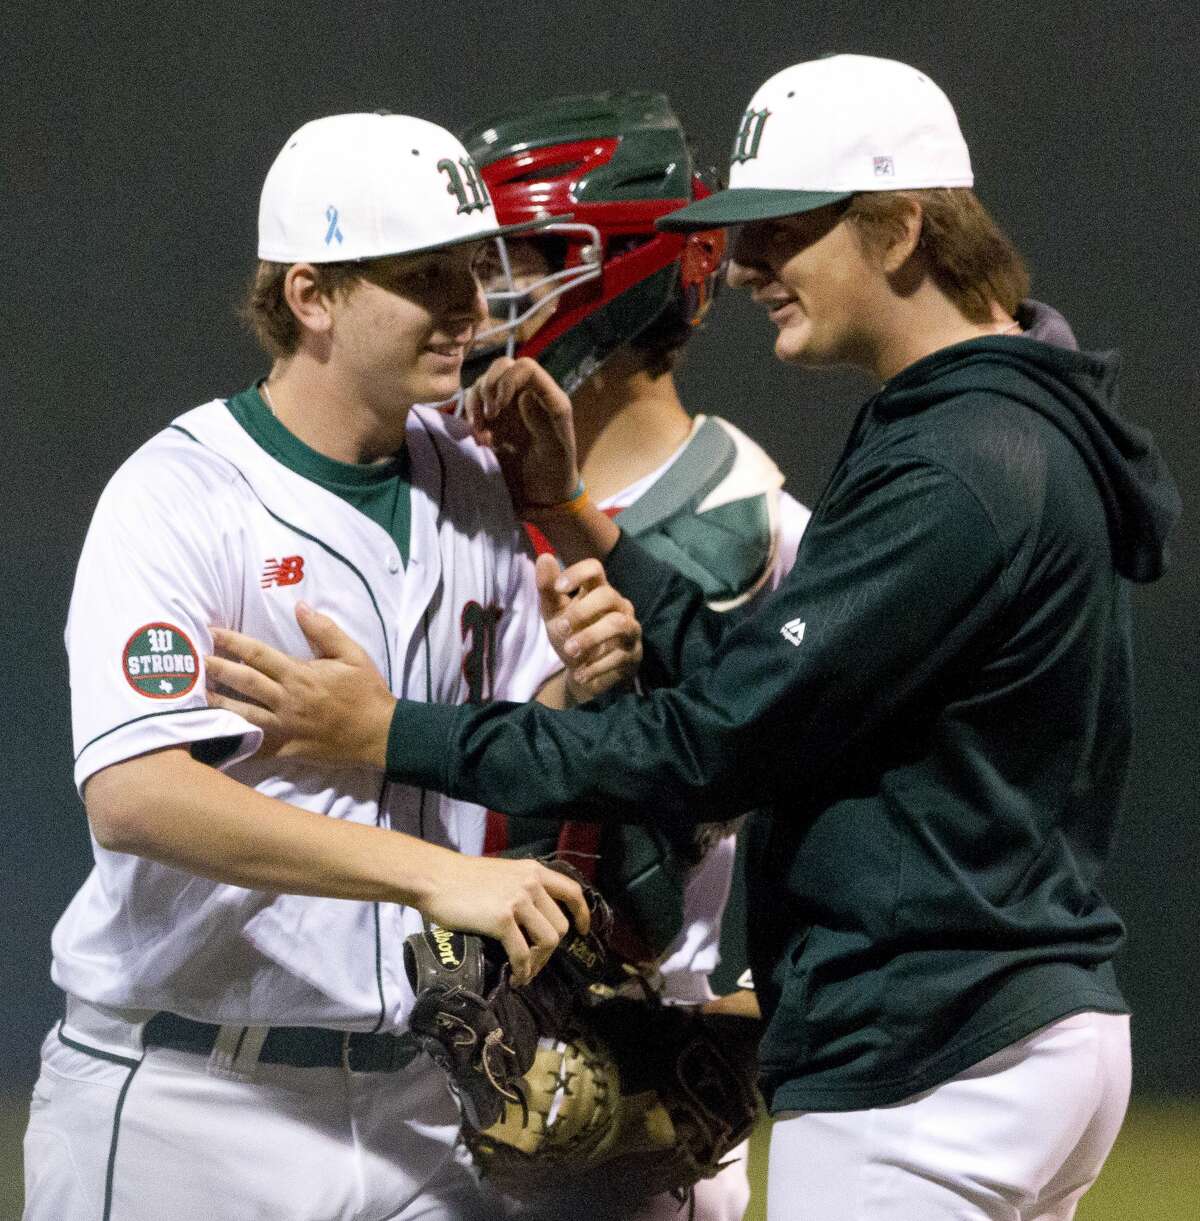 The Woodlands starting pitcher Steven Beard (16) is greated by teammates after the final out of the seventh inning as the Highlanders defeated Montgomery 3-1 in the first District 12-6A game of the season, Tuesday, March 13, 2018, in The Woodlands.